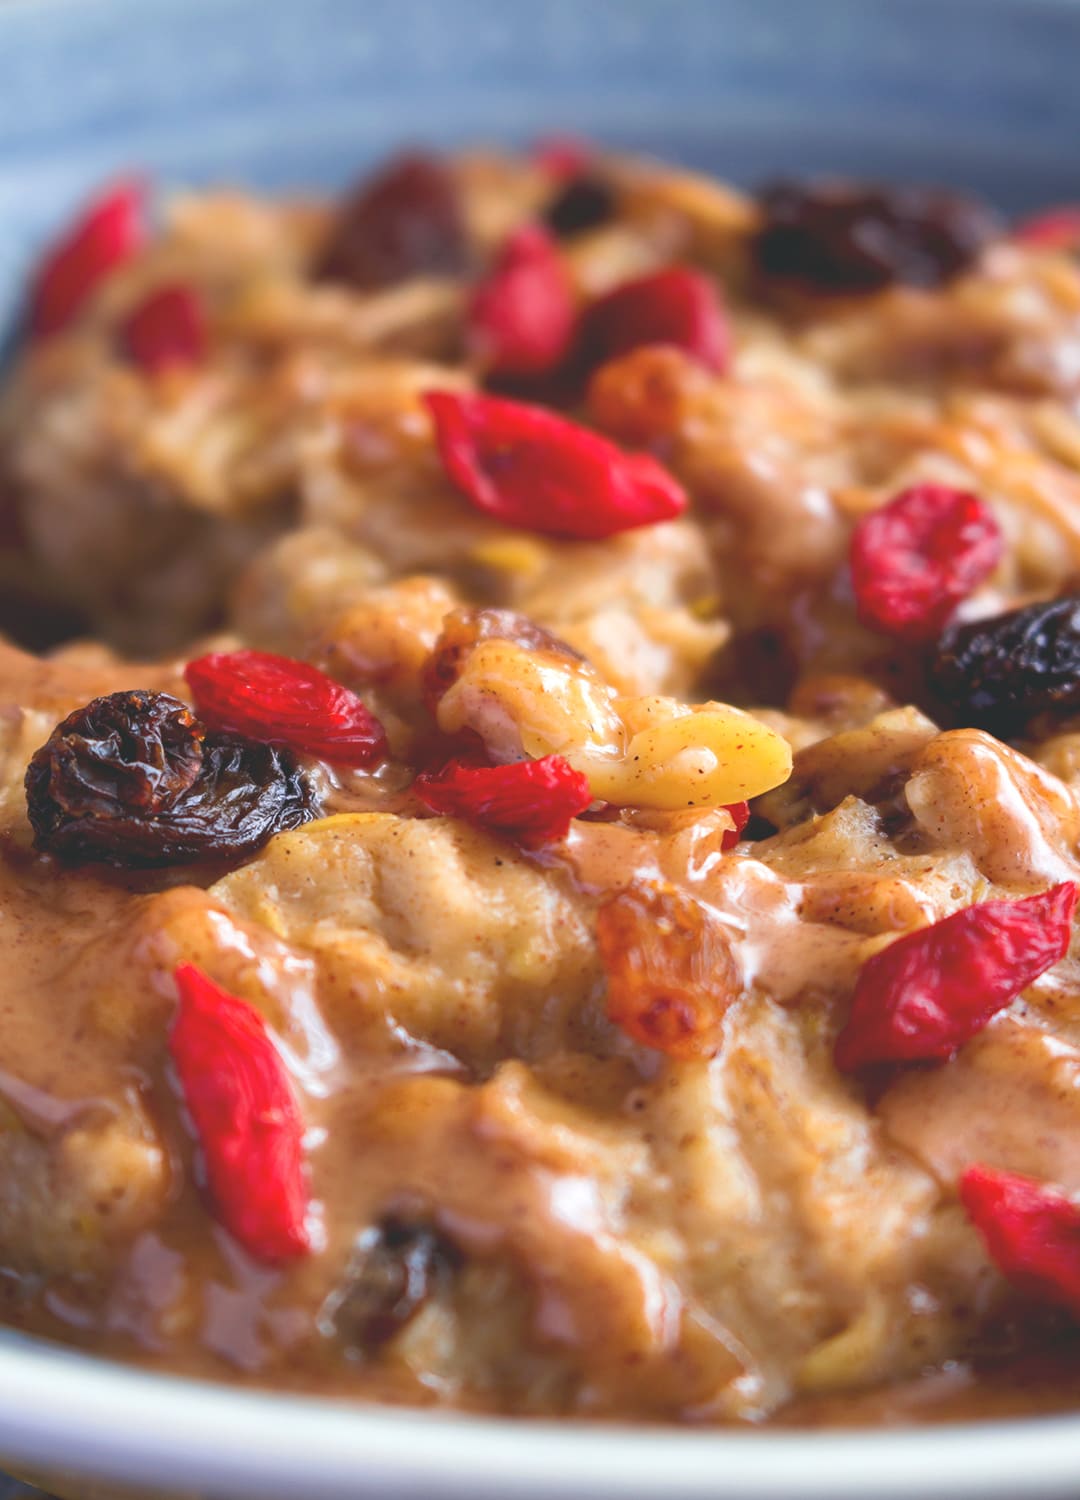 Apple Pie Oatmeal with Raisins and Goji Berries is the perfect breakfast for a gloomy Autumn day. It's easy, quick, delicious and really satisfying! I LOVE this recipe! | thehealthfulideas.com